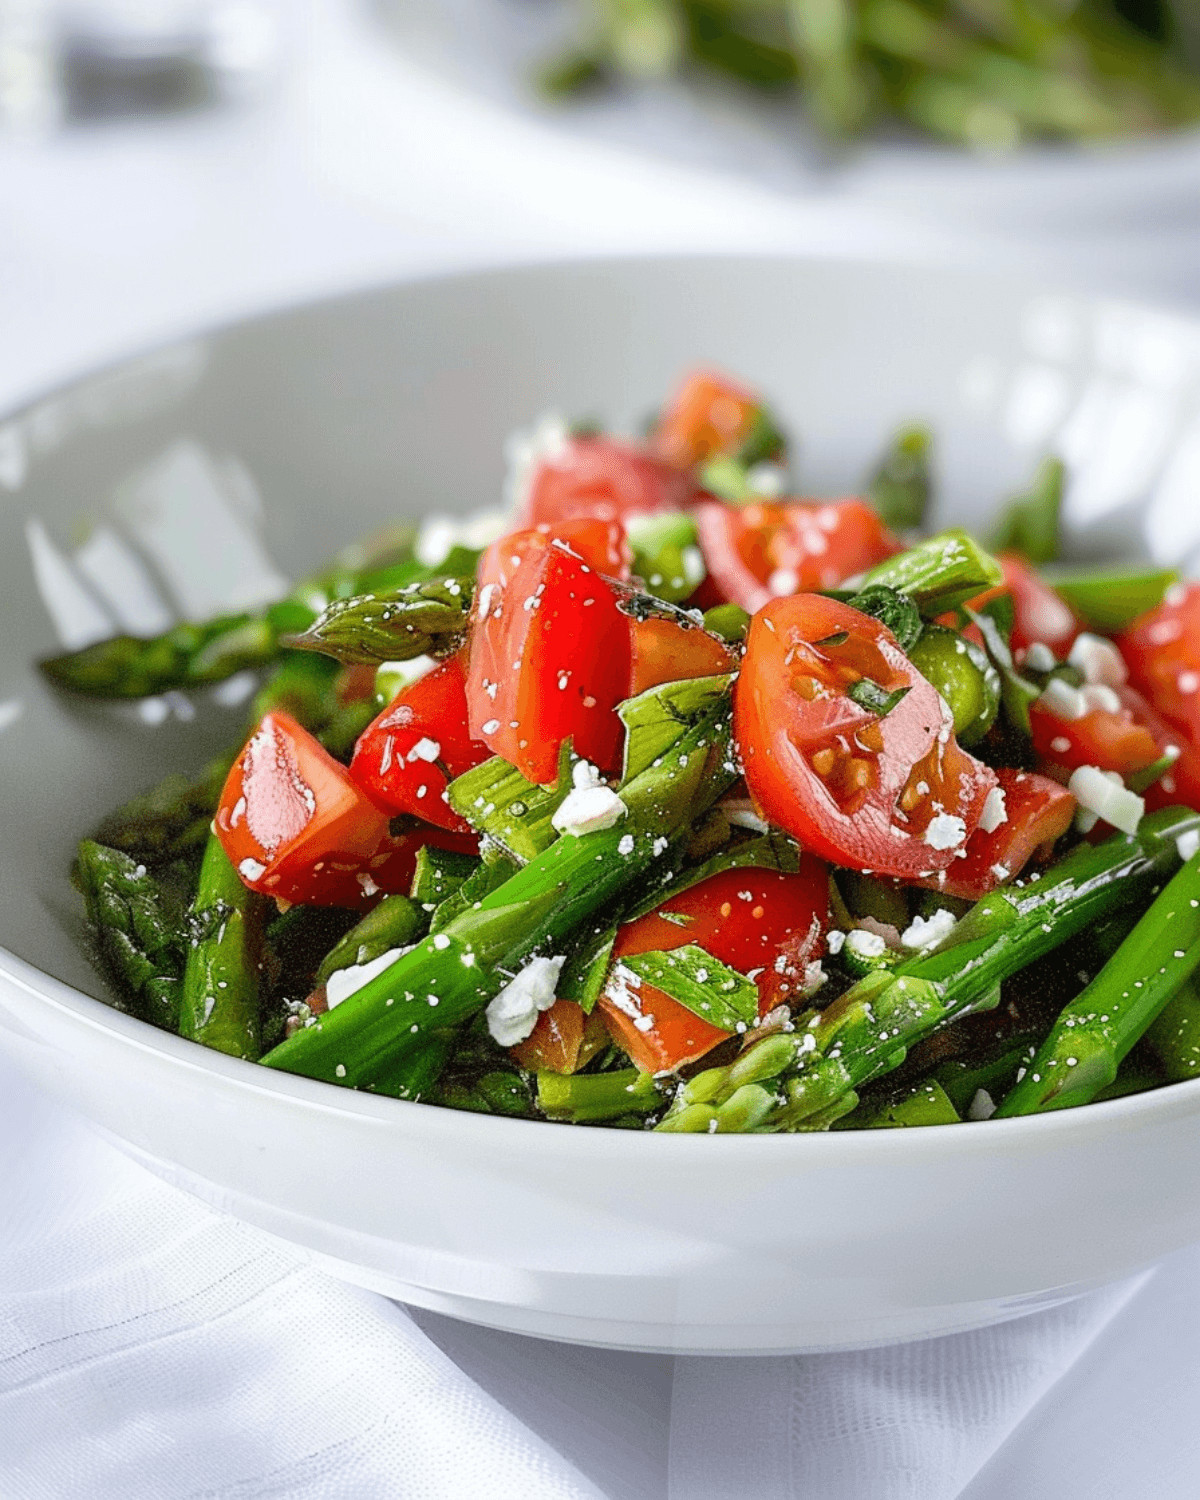 A bowl of tomato and asparagus salad with feta cheese and seasonings, on a white tablecloth.